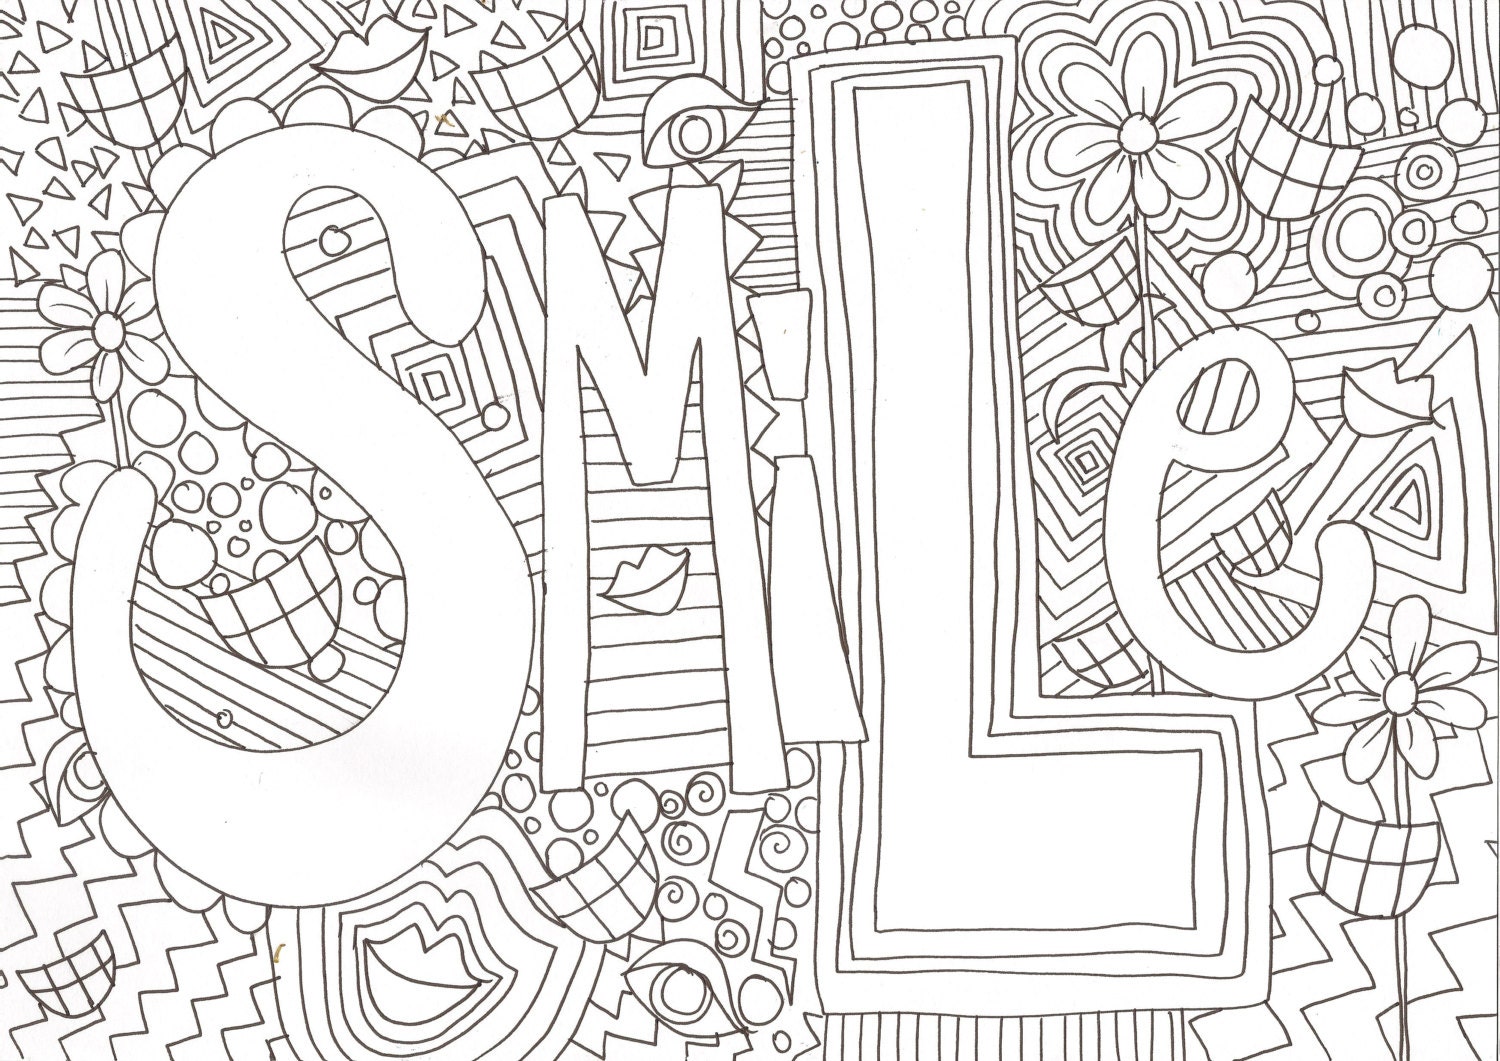 smile colouring page hand drawn positive